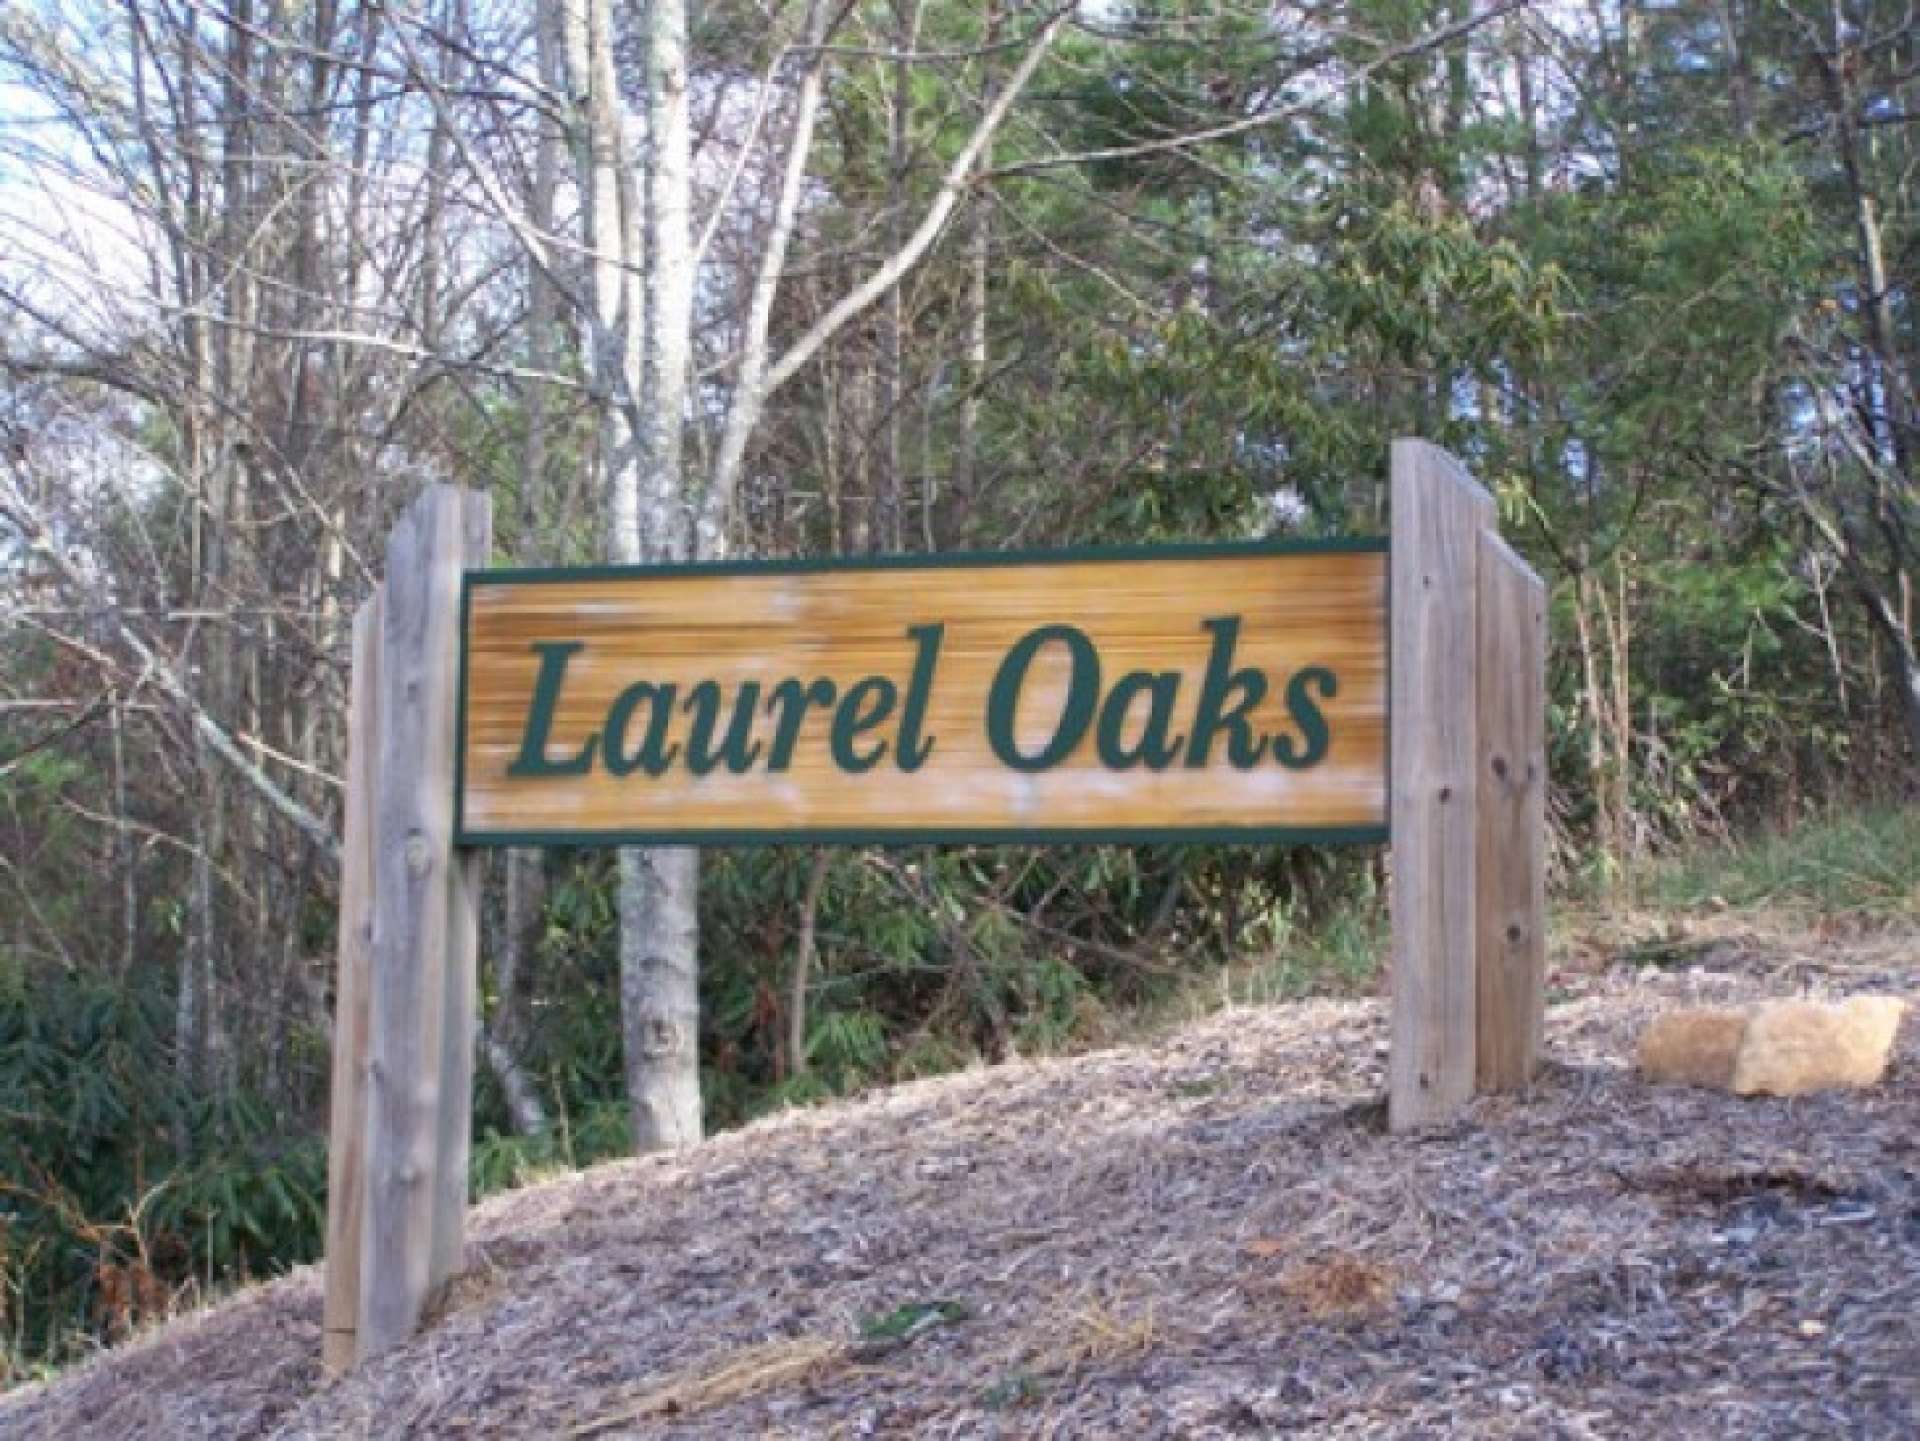 Laurel Oaks is located in Fleetwood, convenient to Boone and West Jefferson.